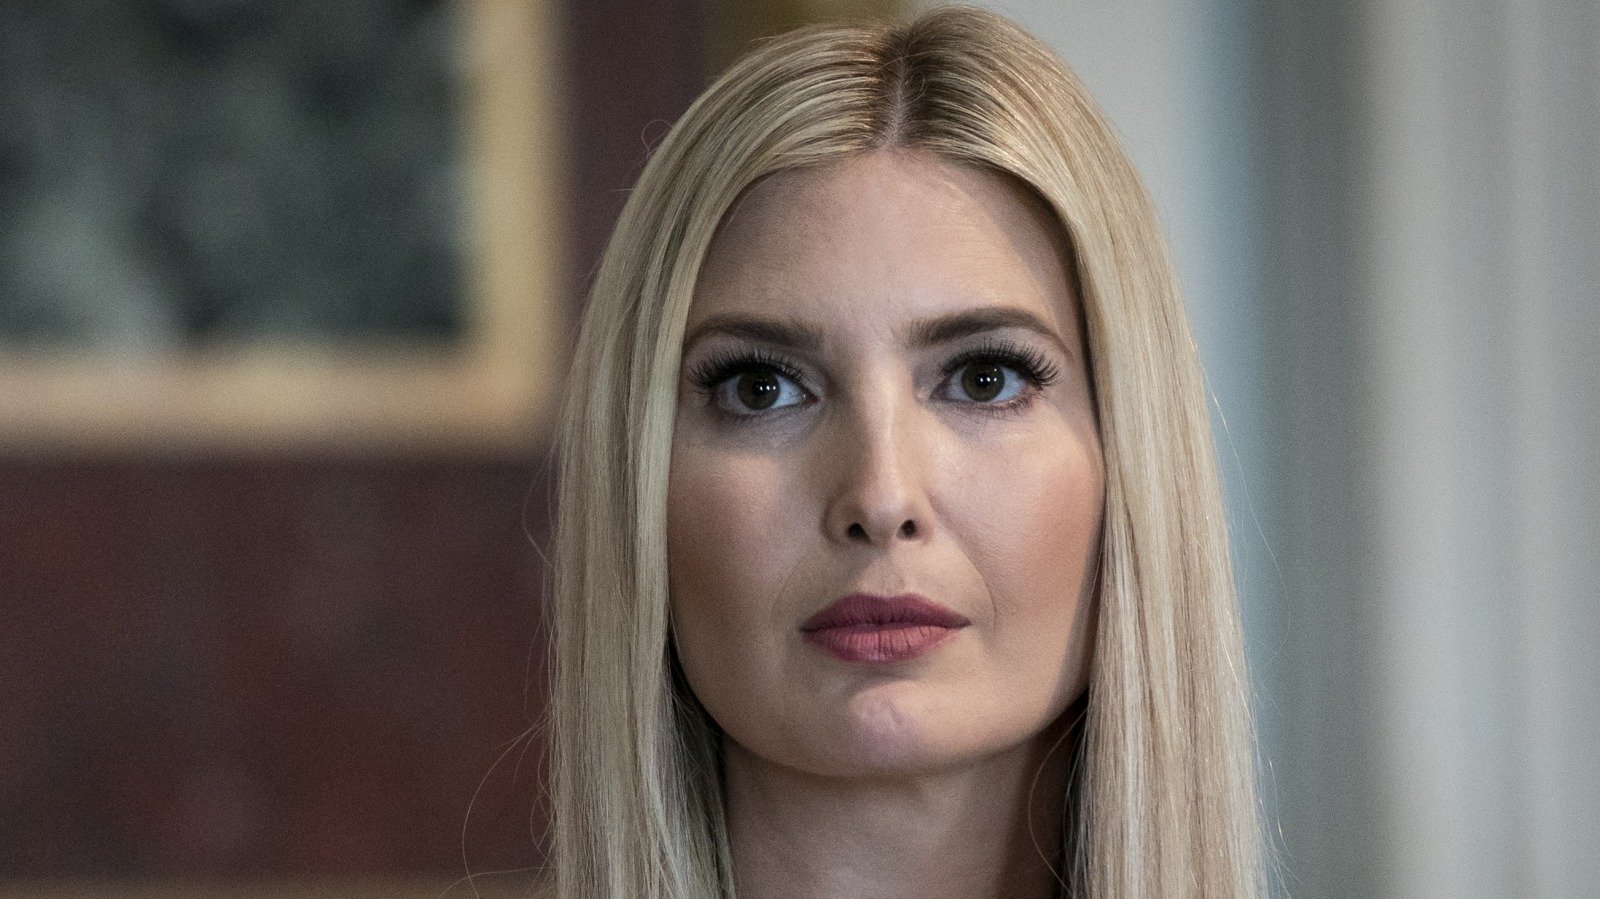 What's Next For Ivanka Trump?